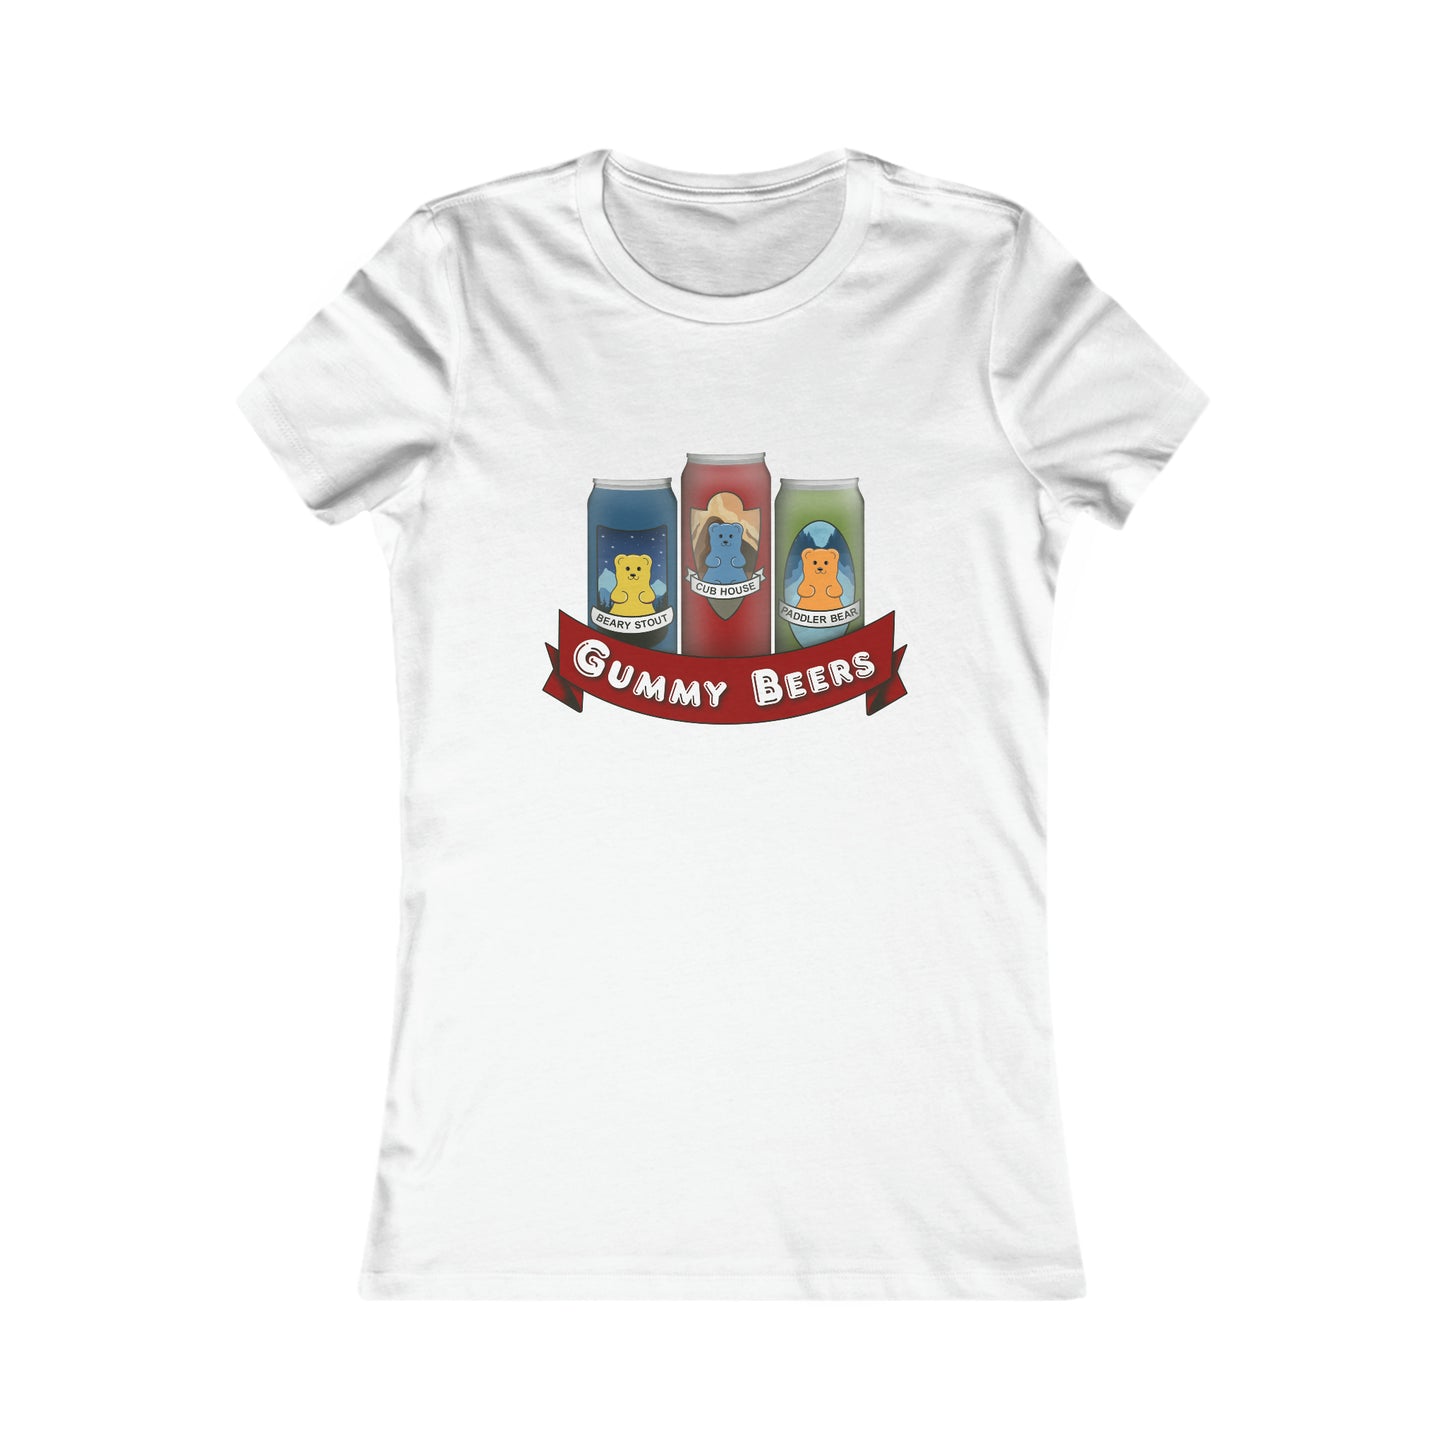 Gummy Beers Fitted Tee